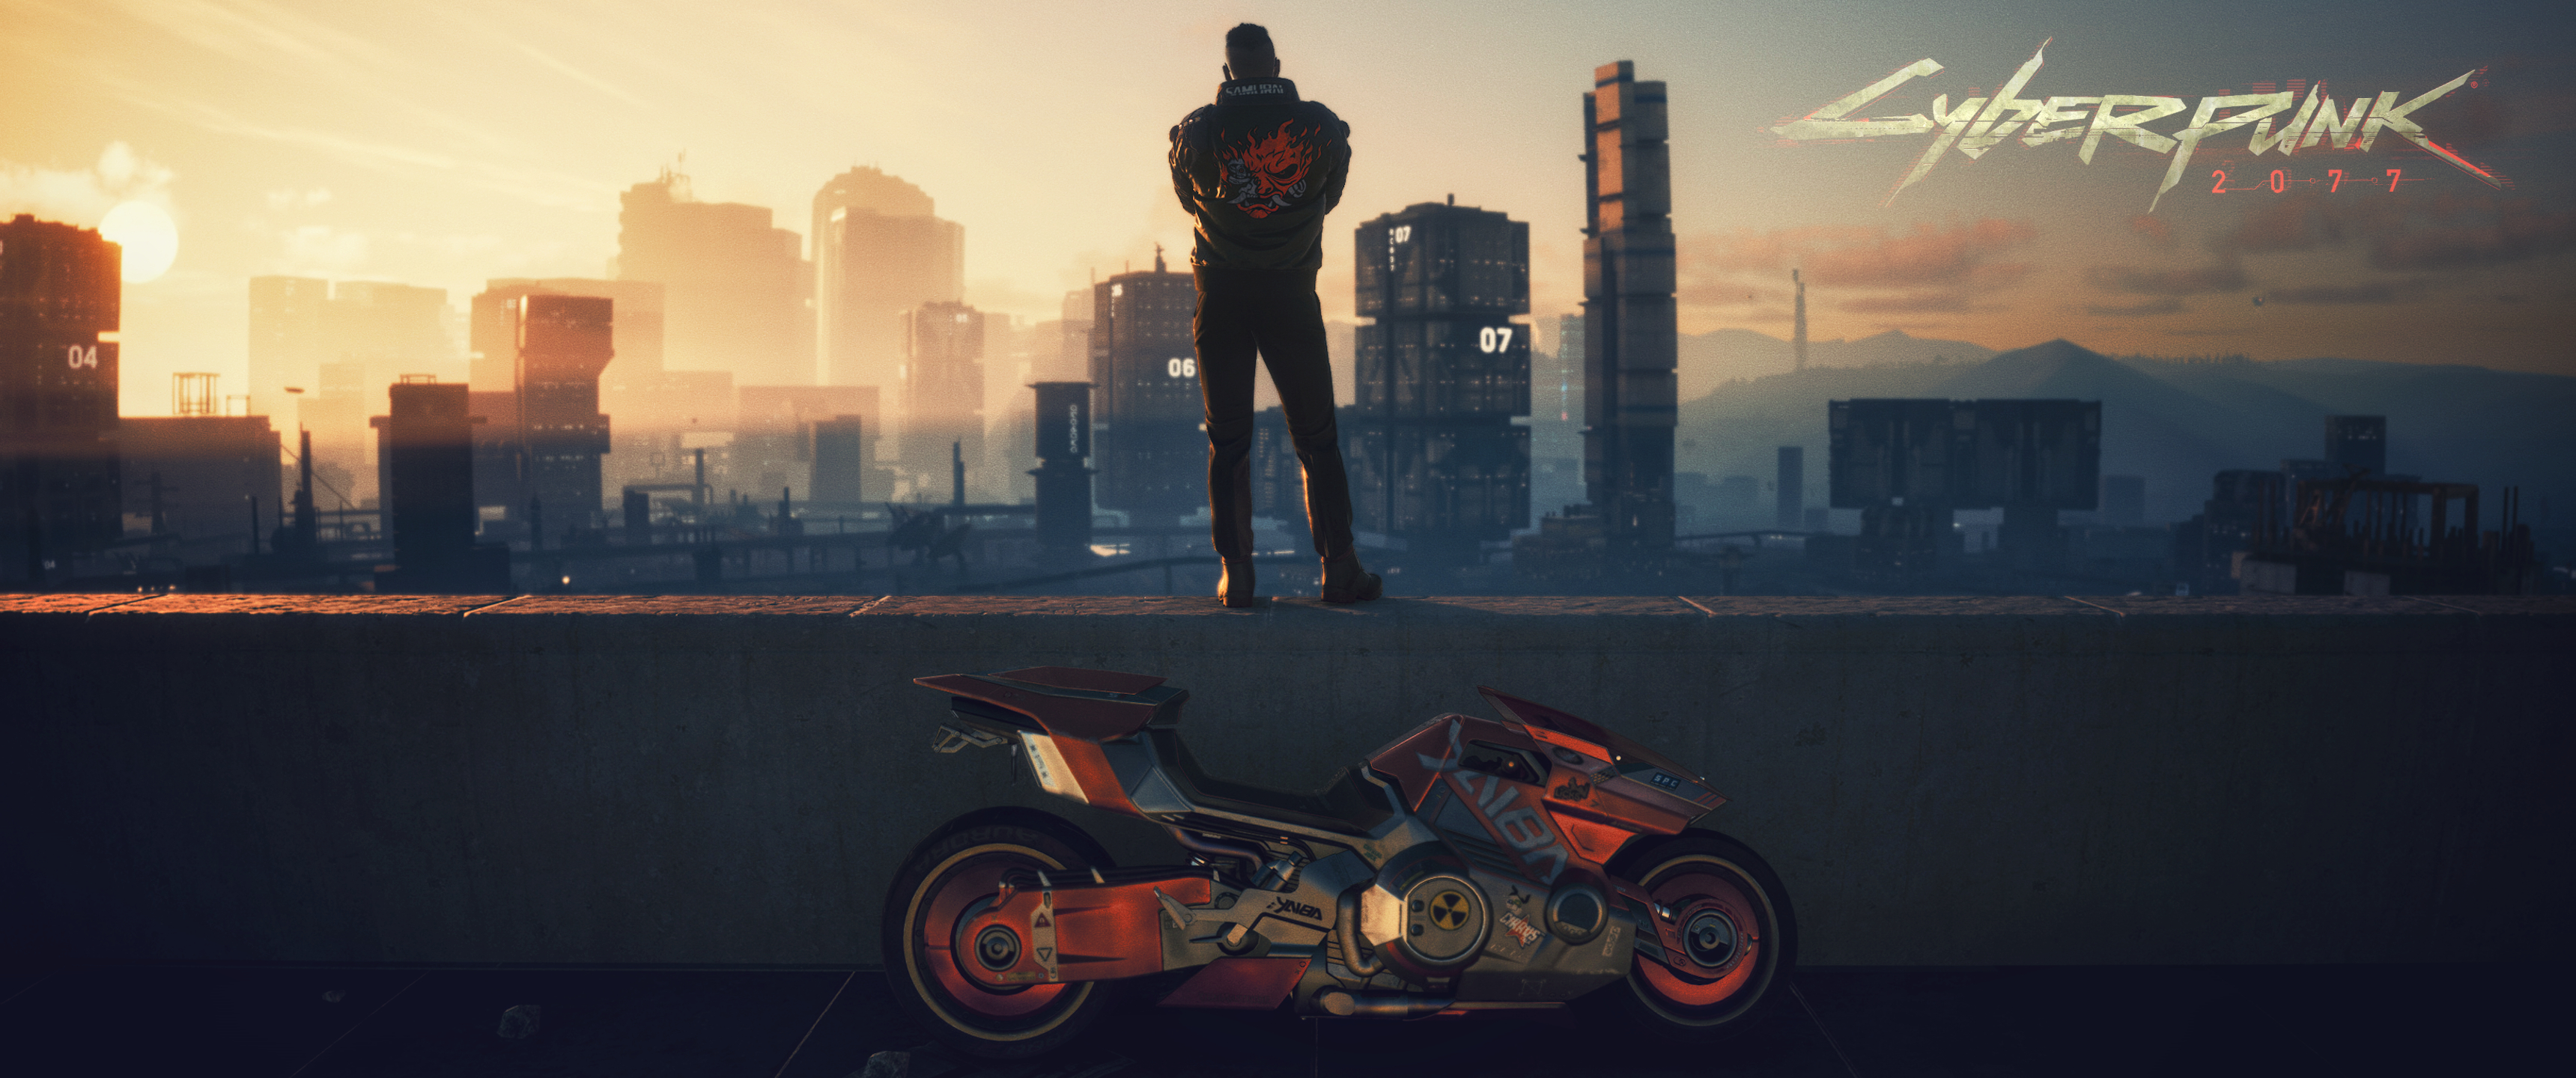 General 3440x1440 Cyberpunk 2077 motorcycle video games PC gaming vehicle